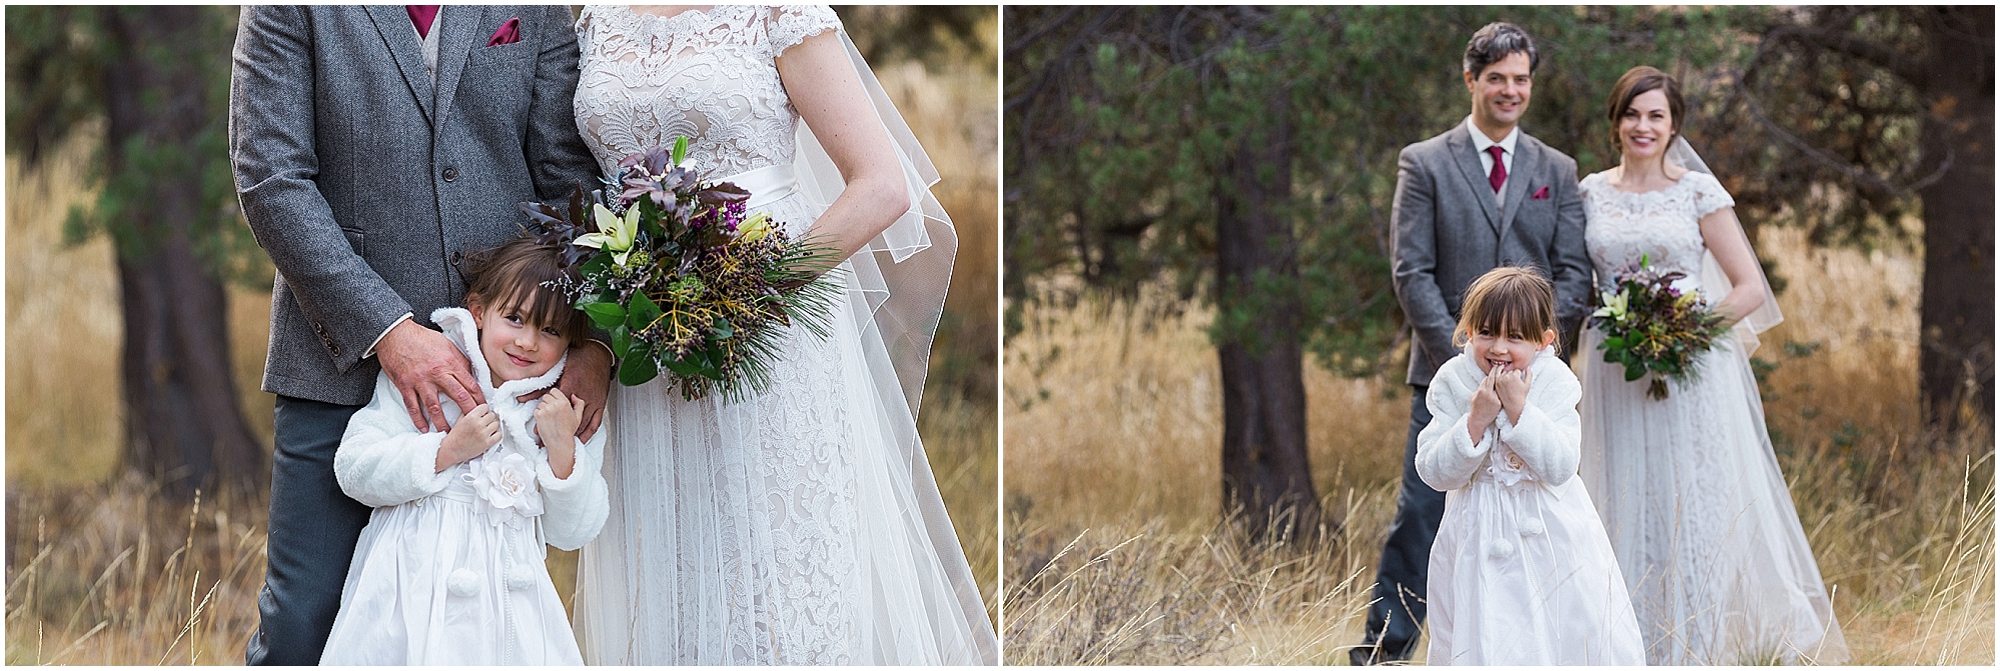 The daughter of the bride is a bit shy when taking family portraits during this Sunriver Resort winter wedding in Oregon. | Erica Swantek Photography